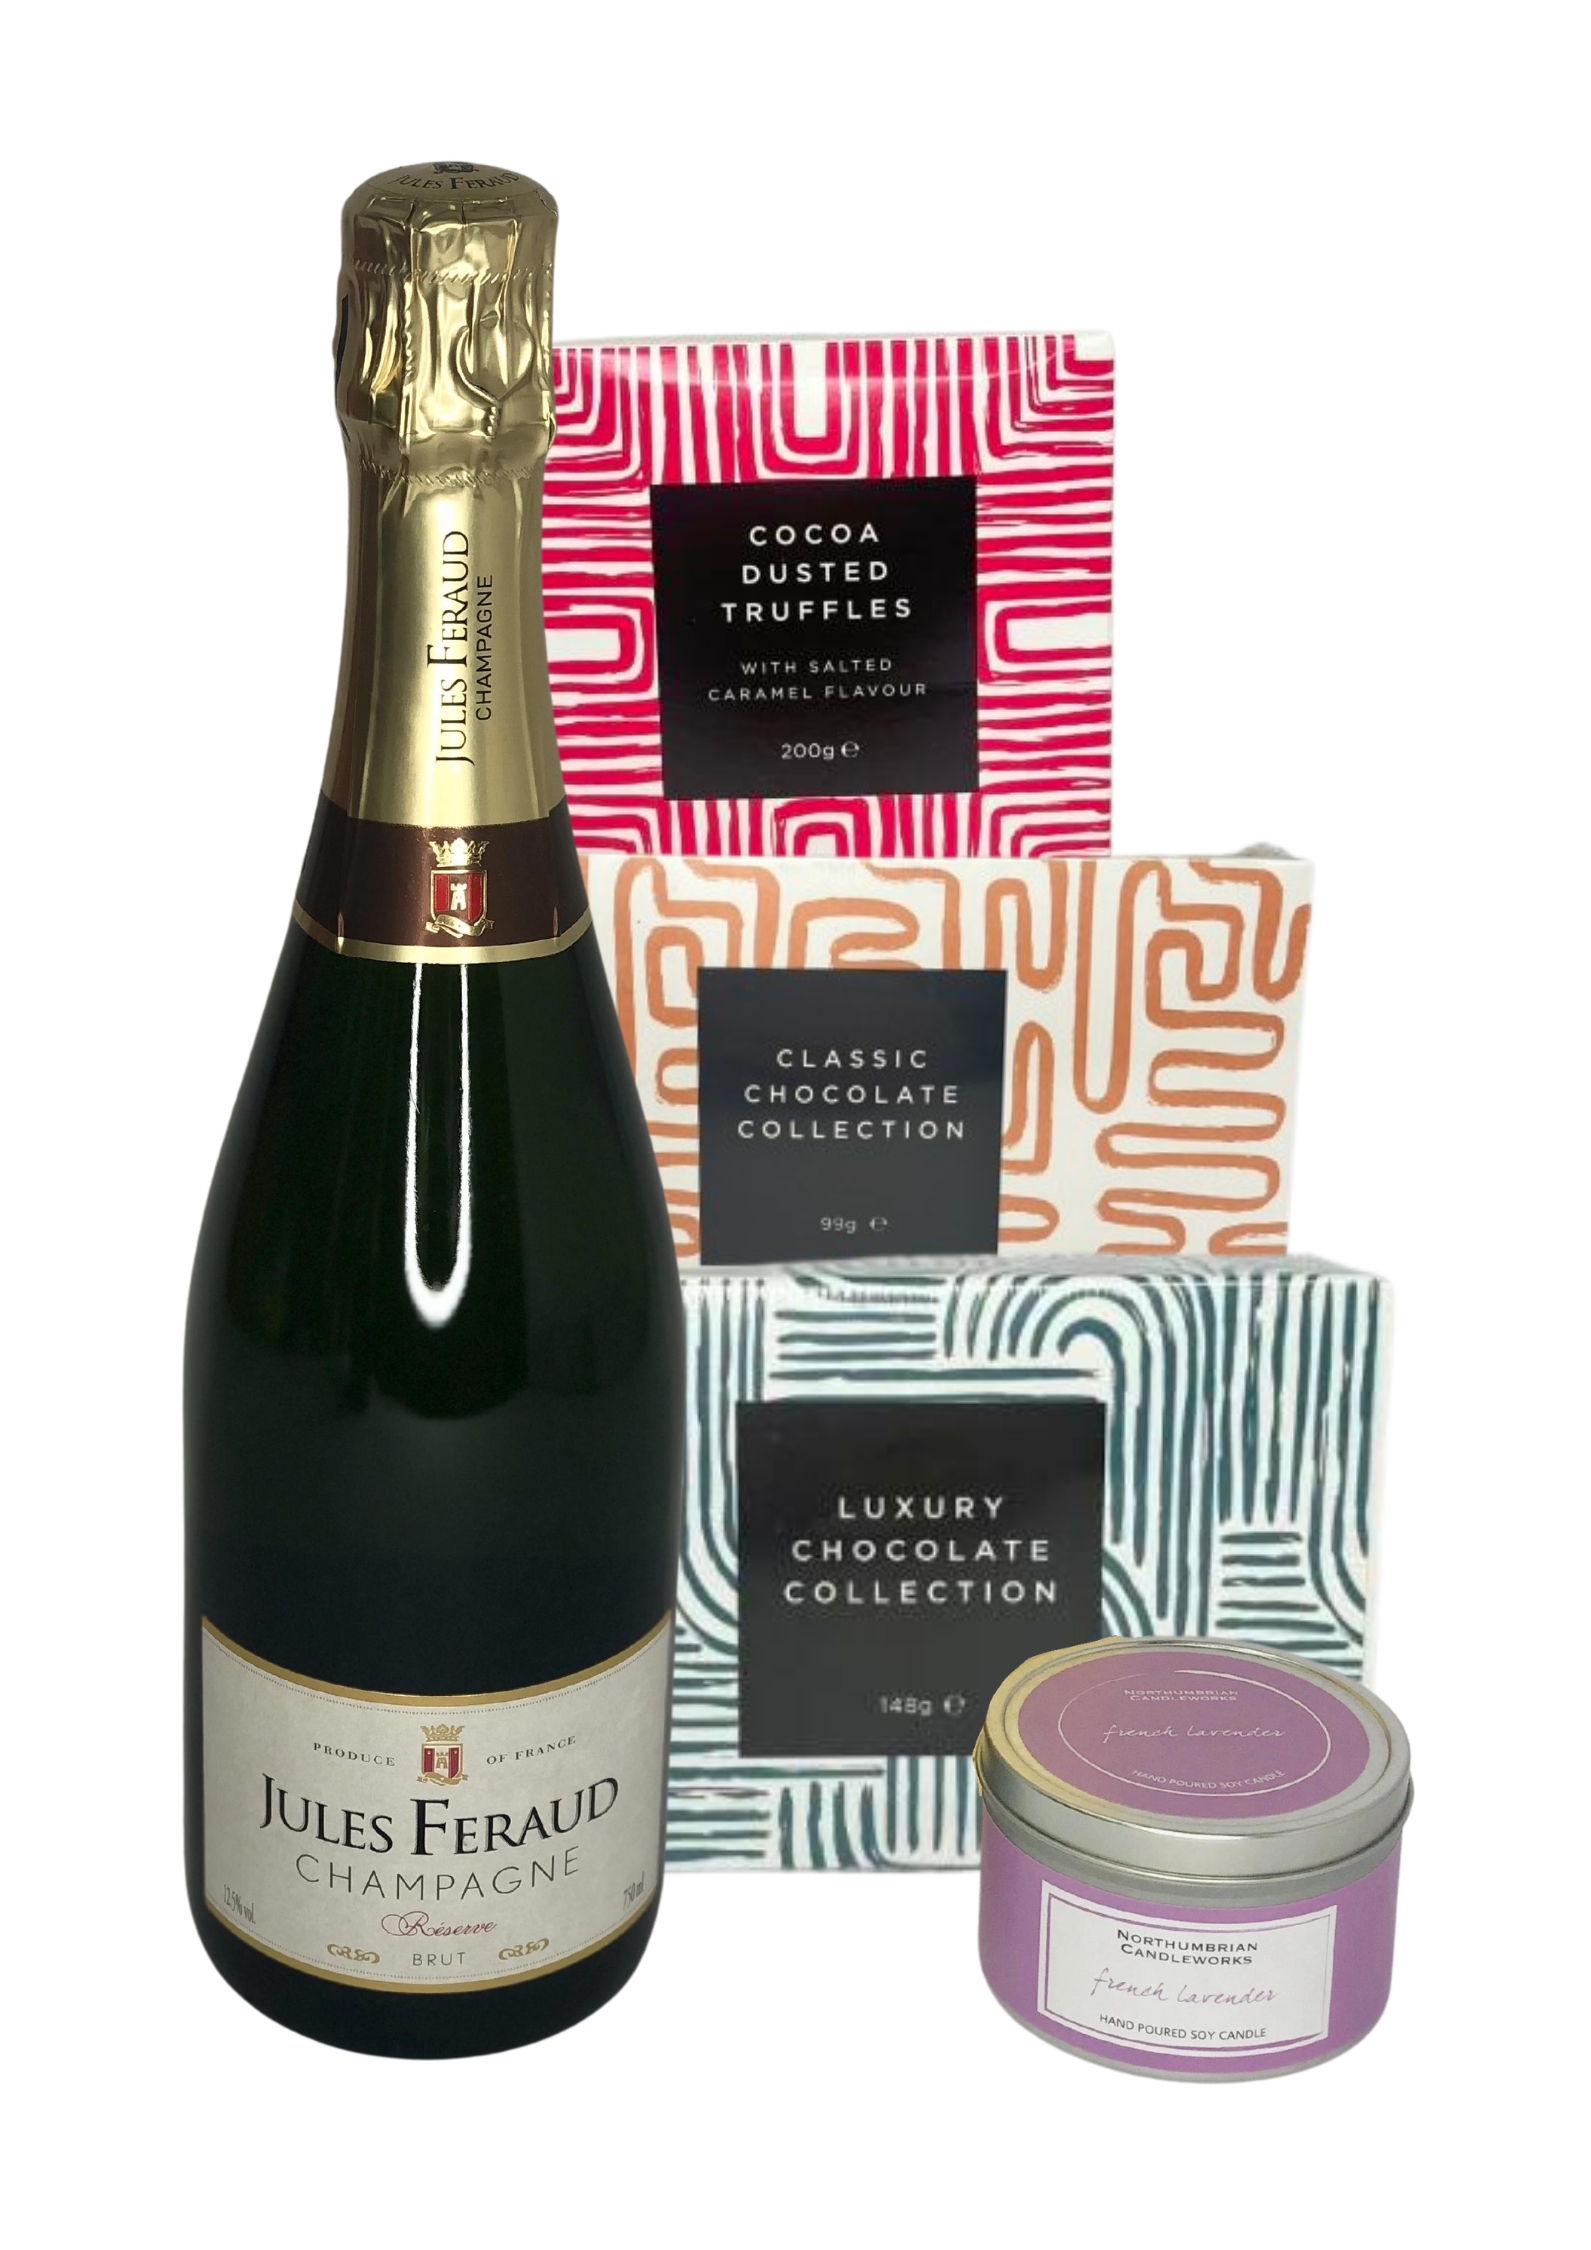 <p>Order this Special Gift Set to celebrate any occasion and you will not be disappointed.  Containing, a bottle of Jules Feraud Champagne, three boxes of Maison Fougere Belgian Chocolates together with an eco-friendly Soy Scented Candle beautifully presented in a stylish Gift Box.</p>
<br>
<h2>Gift Delivery Coverage</h2>
<p>Our shop delivers flowers and gifts to the following Liverpool postcodes L1 L2 L3 L4 L5 L6 L7 L8 L11 L12 L13 L14 L15 L16 L17 L18 L19 L24 L25 L26 L27 L36 L70 ONLY.  If your order is for an area outside unfortunately we cannot process your order because of the difference in stock at other florists.</p>
<br>
<h2>Alcohol Gifts</h2>
<p>As a licensed florist, we are able to supply alcoholic drinks either as a gift on their own or with flowers. We have carefully selected a range that we know you will love either as a gift in itself or to provide that extra bit of celebratory luxury to a floral gift.</p>
<p>This gift set contains a bottle of Jules Feraud Champagne, together with a box of 170g Maison Fougere Salted Caramels, a box of 140g Maison Fougere  Chocolate Truffles, a box of 115g Maison Fougere Belgian Chocolates together with a locally made eco-friendly Northumbrian Scented Soy Candle in a stylish tin.</p>
<p>Have this giftset delivered to someone special to celebrate as an alternative to having flowers delivered, or have it delivered with your flowers to really celebrate!</p>
<br>
<h2>Online Gift Ordering | Online Gift Delivery</h2>
<p>Through this website you can order 24 hours, Booker Gifts and Gifts Liverpool have put together this carefully selected range of Flowers, Gifts and Finishing Touches to make Gift ordering as easy as possible. This means even if you do not live in Liverpool we make it easy for you to see what you are getting when buying for delivery in Liverpool.</p>
<br>
<h2>Liverpool Flower and Gift Delivery</h2>
<p>We are open 7 days a week and offer advanced booking flower delivery, same-day flower delivery, Guaranteed AM Flower Delivery and also offer Sunday Flower Delivery.</p>
<p>Our florists Deliver in Liverpool and can provide flowers for you in Liverpool, Merseyside. And through our network of florists can organise flower deliveries for you nationwide.</p>
<br>
<h2>Beautiful Gifts Delivered | Best Florist in Liverpool</h2>
<p>Having been nominated the Best Florist in Liverpool by the independent Three Best Rated for the 5th year running you can feel secure with us</p>
<p>You can trust Booker Gifts and Gifts to deliver the very best for you.</p>
<br>
<h2>5 Star Google Review</h2>
<p><em>So Pleased with the product and service received. I am working away currently, so ordered online, and after my own misunderstanding with online payment, I contacted the florist directly to query. Gemma was very prompt and helpful, and my flowers were arranged easily. They arrived this morning and were as impactful as the pictures on the website, and the quality of the flowers and the arrangement were excellent. Great Work! David Welsh</em></p>
<br>